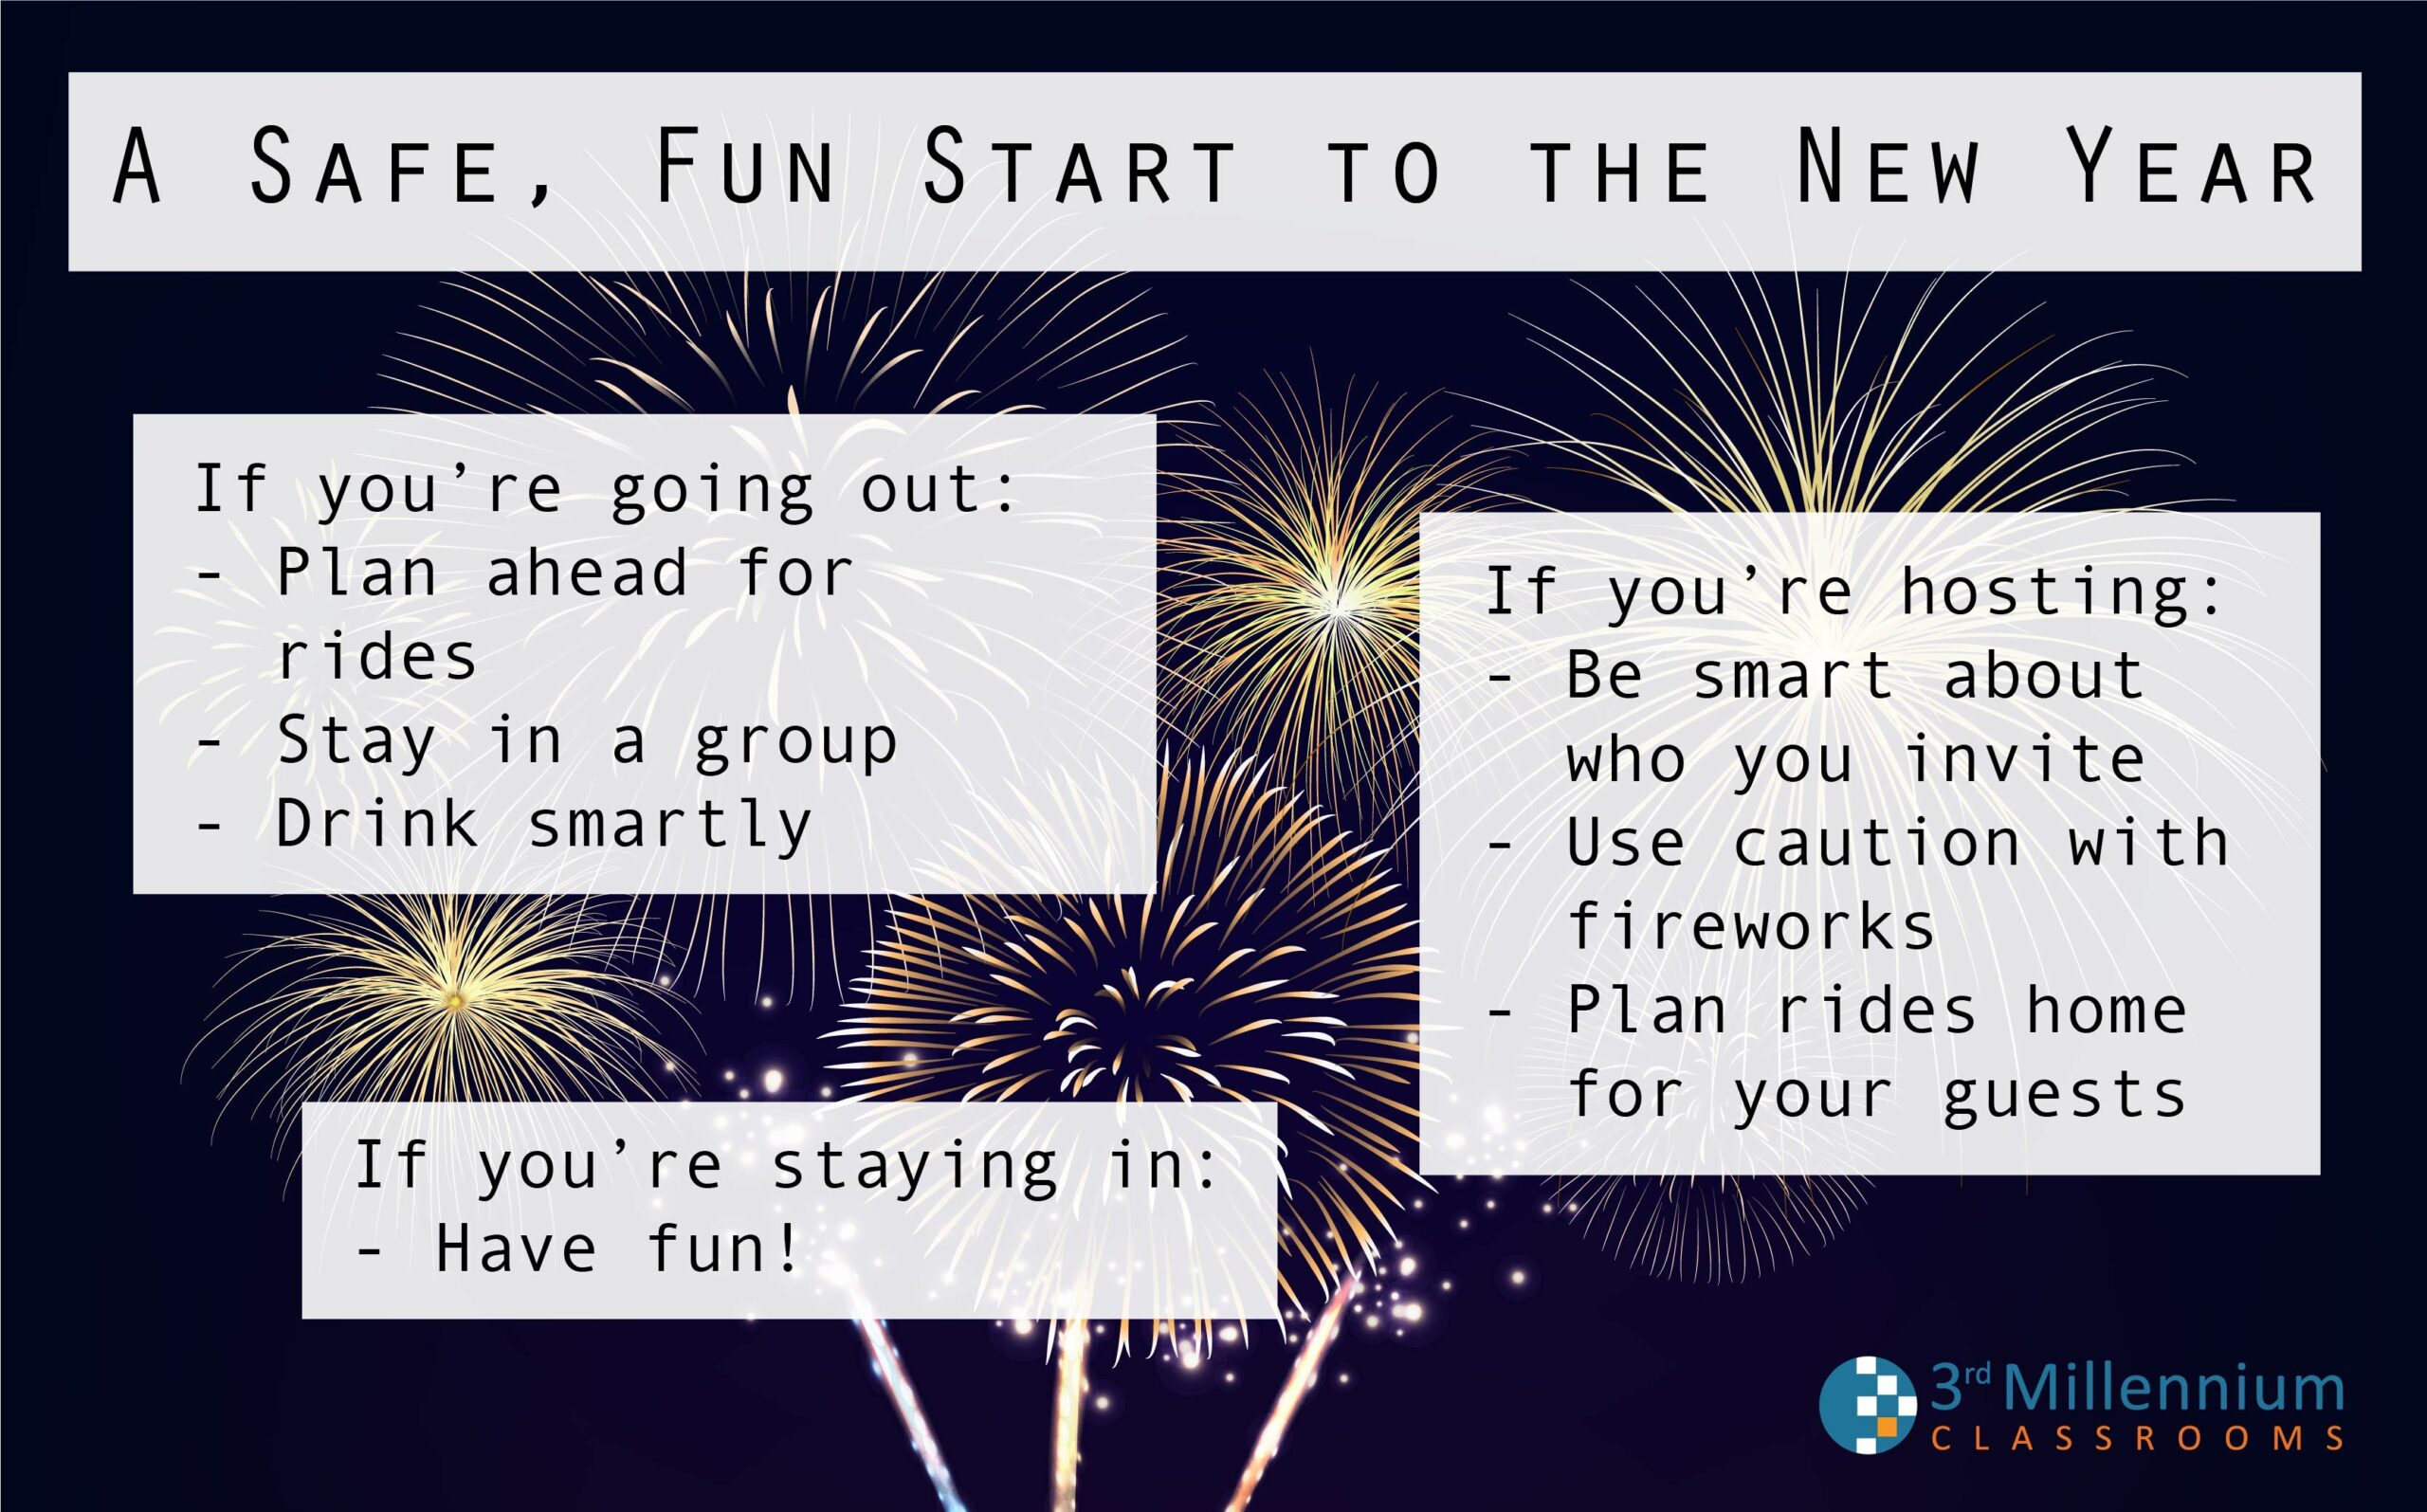 Tips for a safe, fun start to the new year